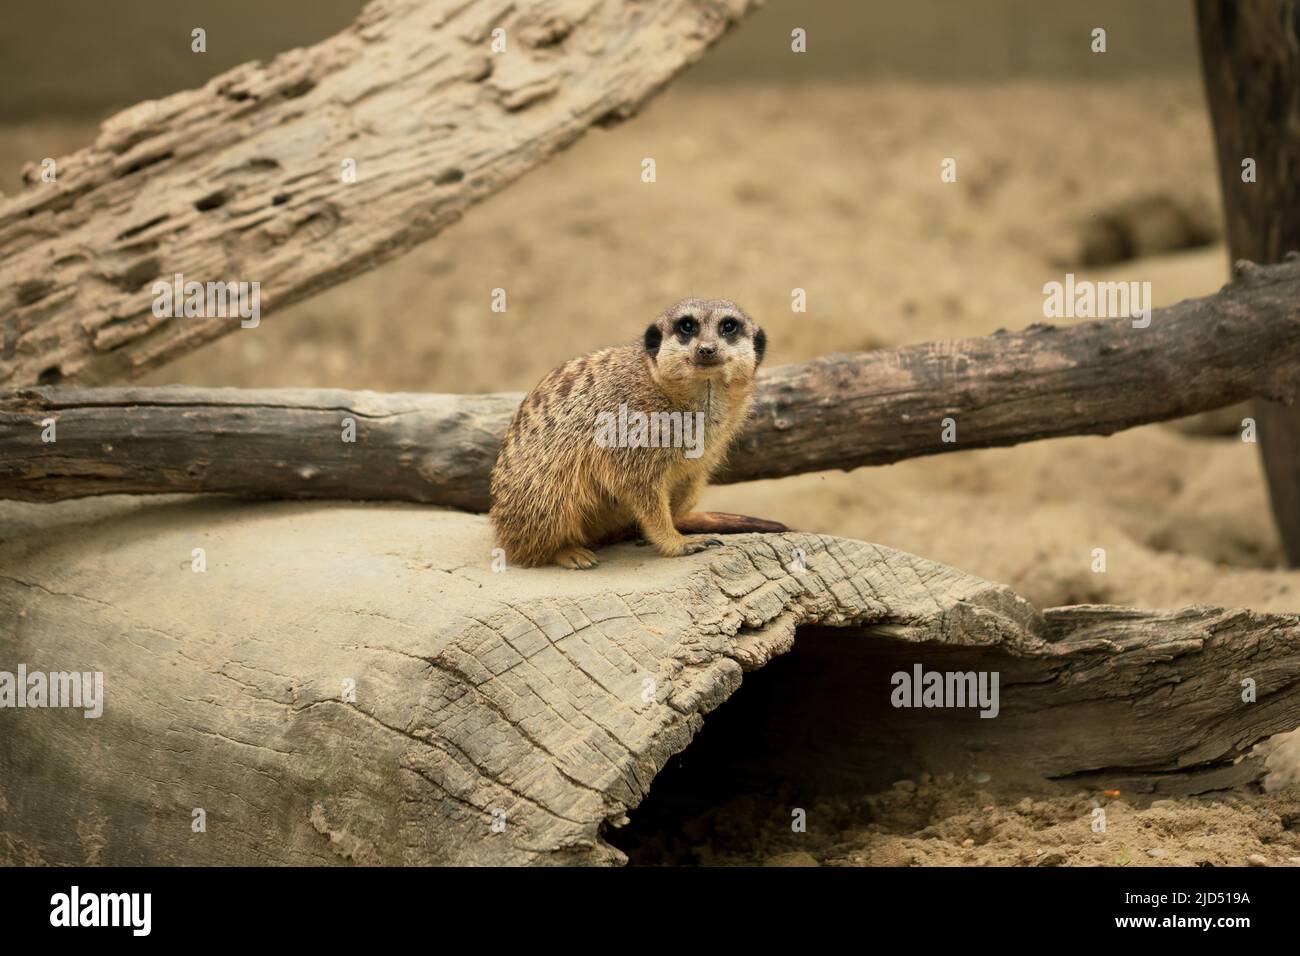 Cute Smiling Suricate, Photo Of Animal In Zoo Stock Photo